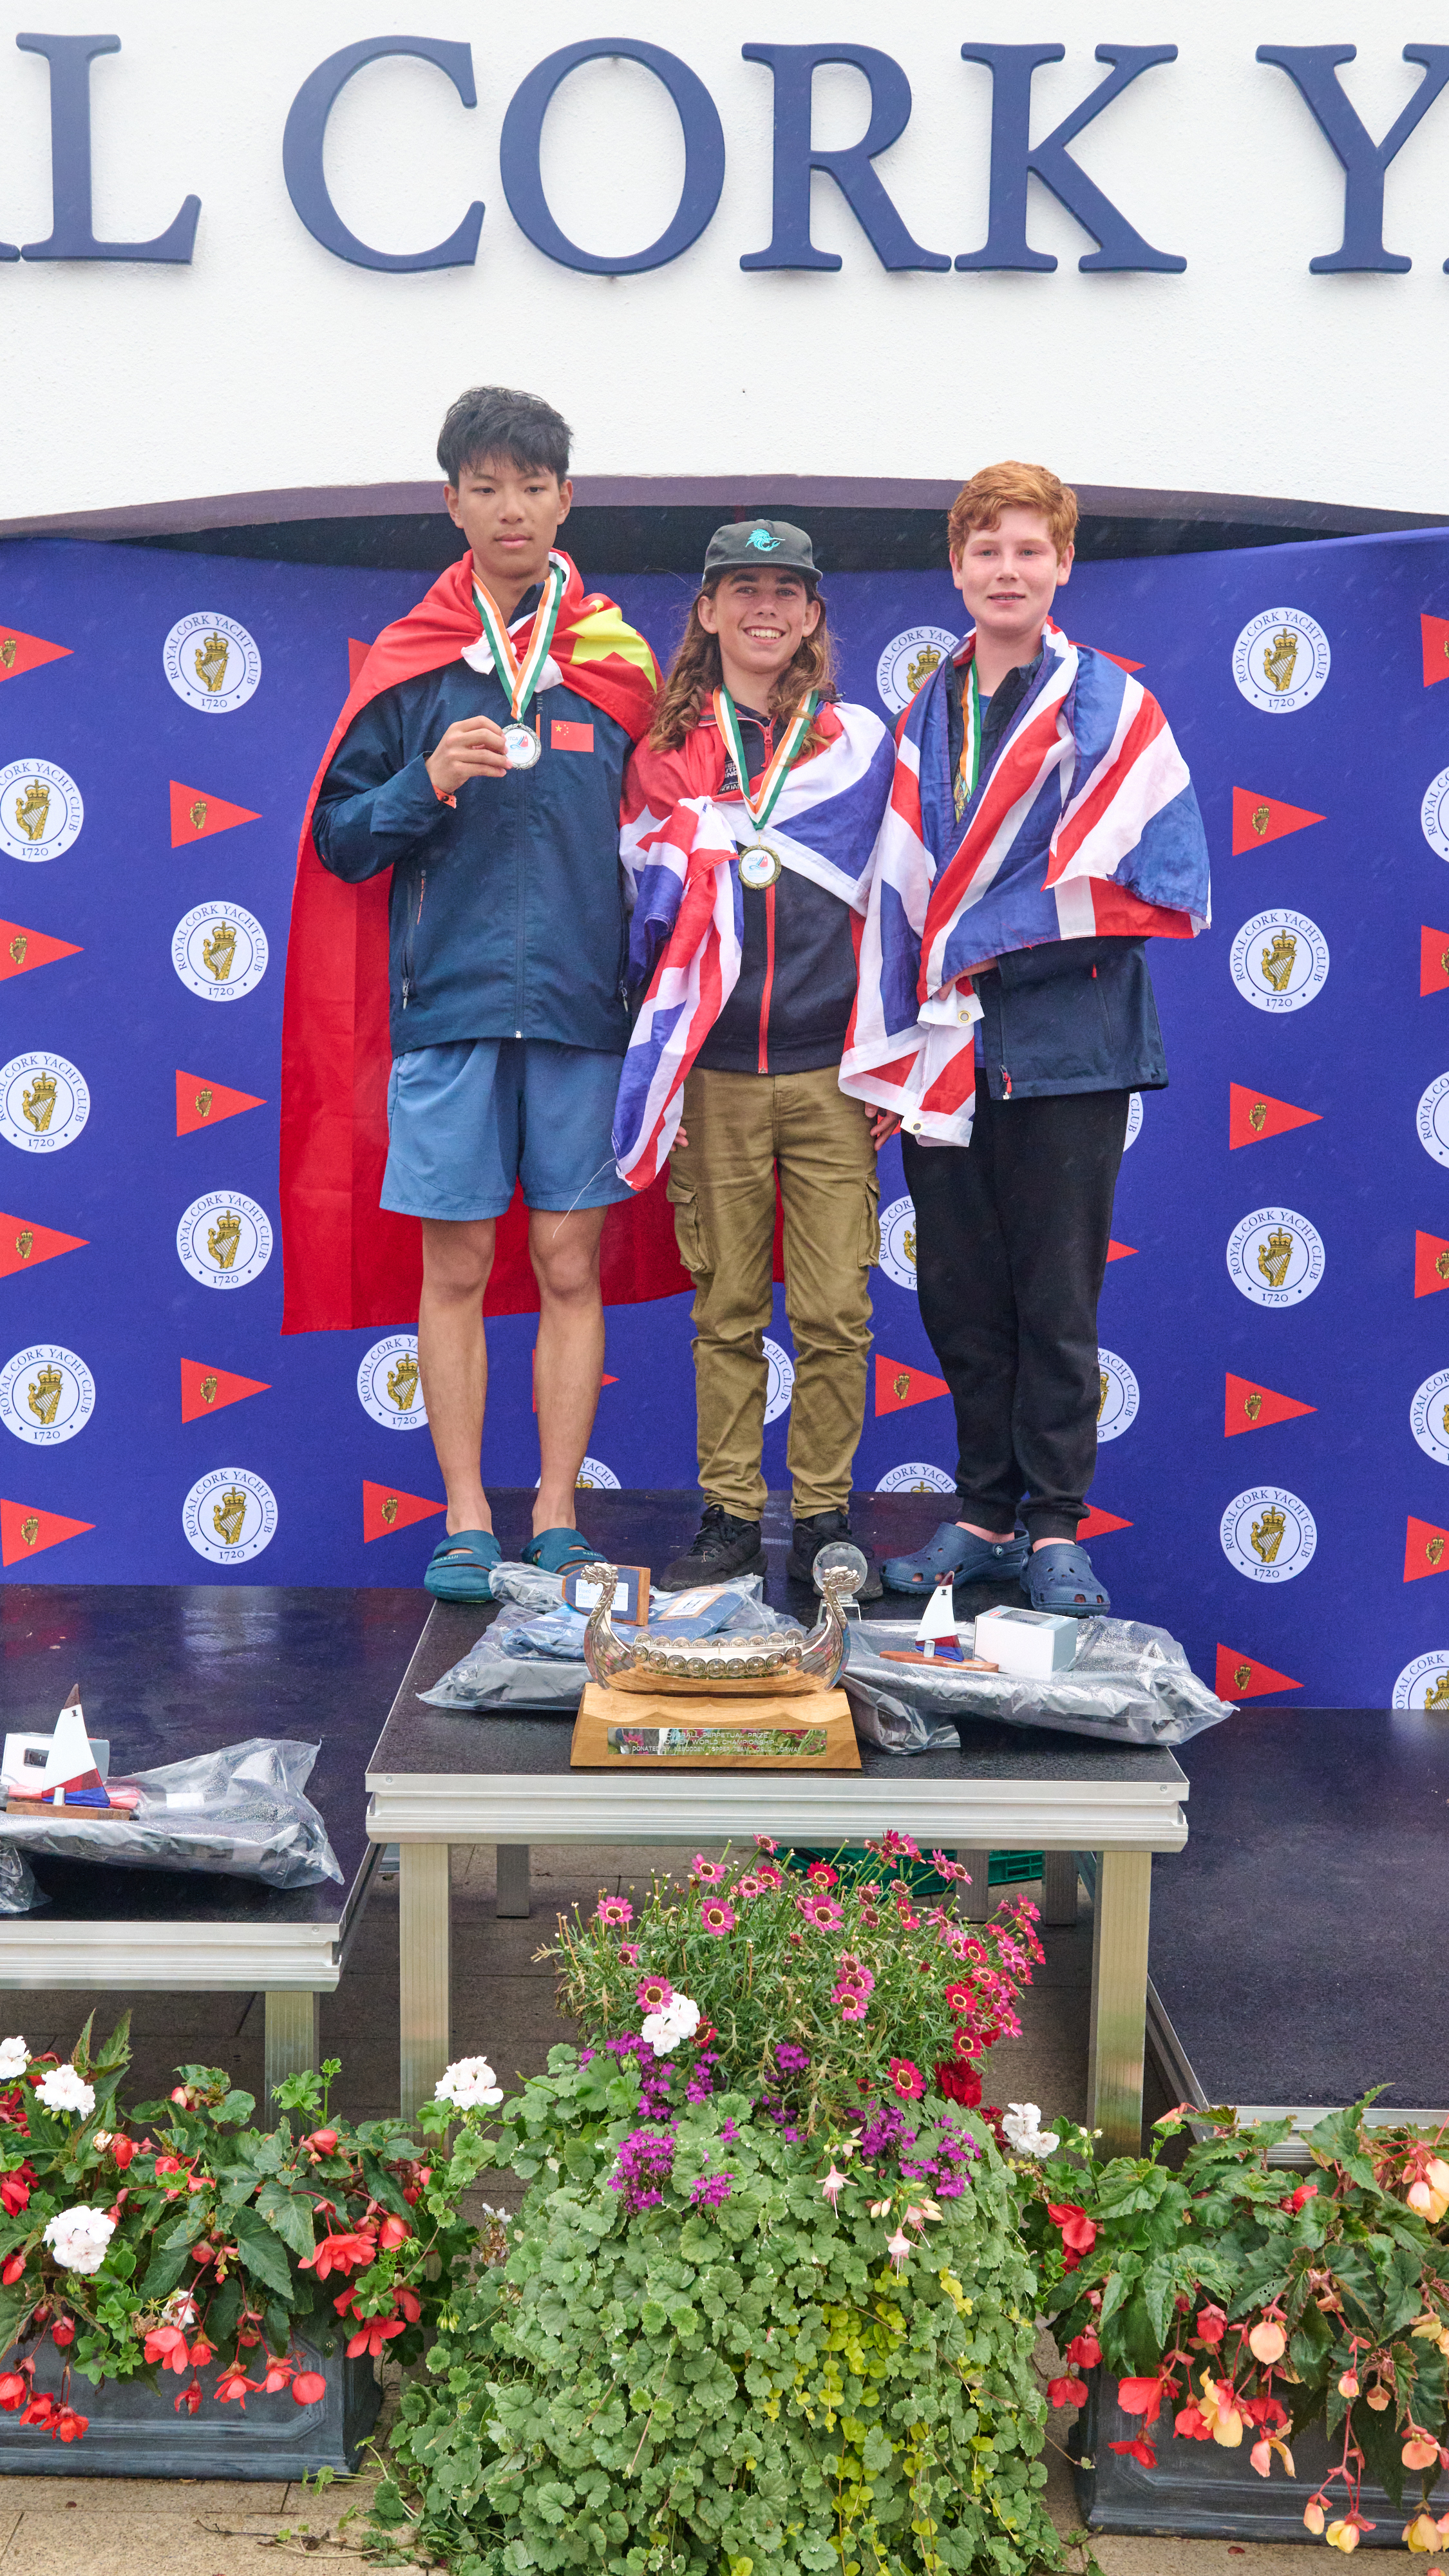 Topper World Champion 2023 Alex Jones (GBR) medalist on the Podium, with national flags wrapped around them